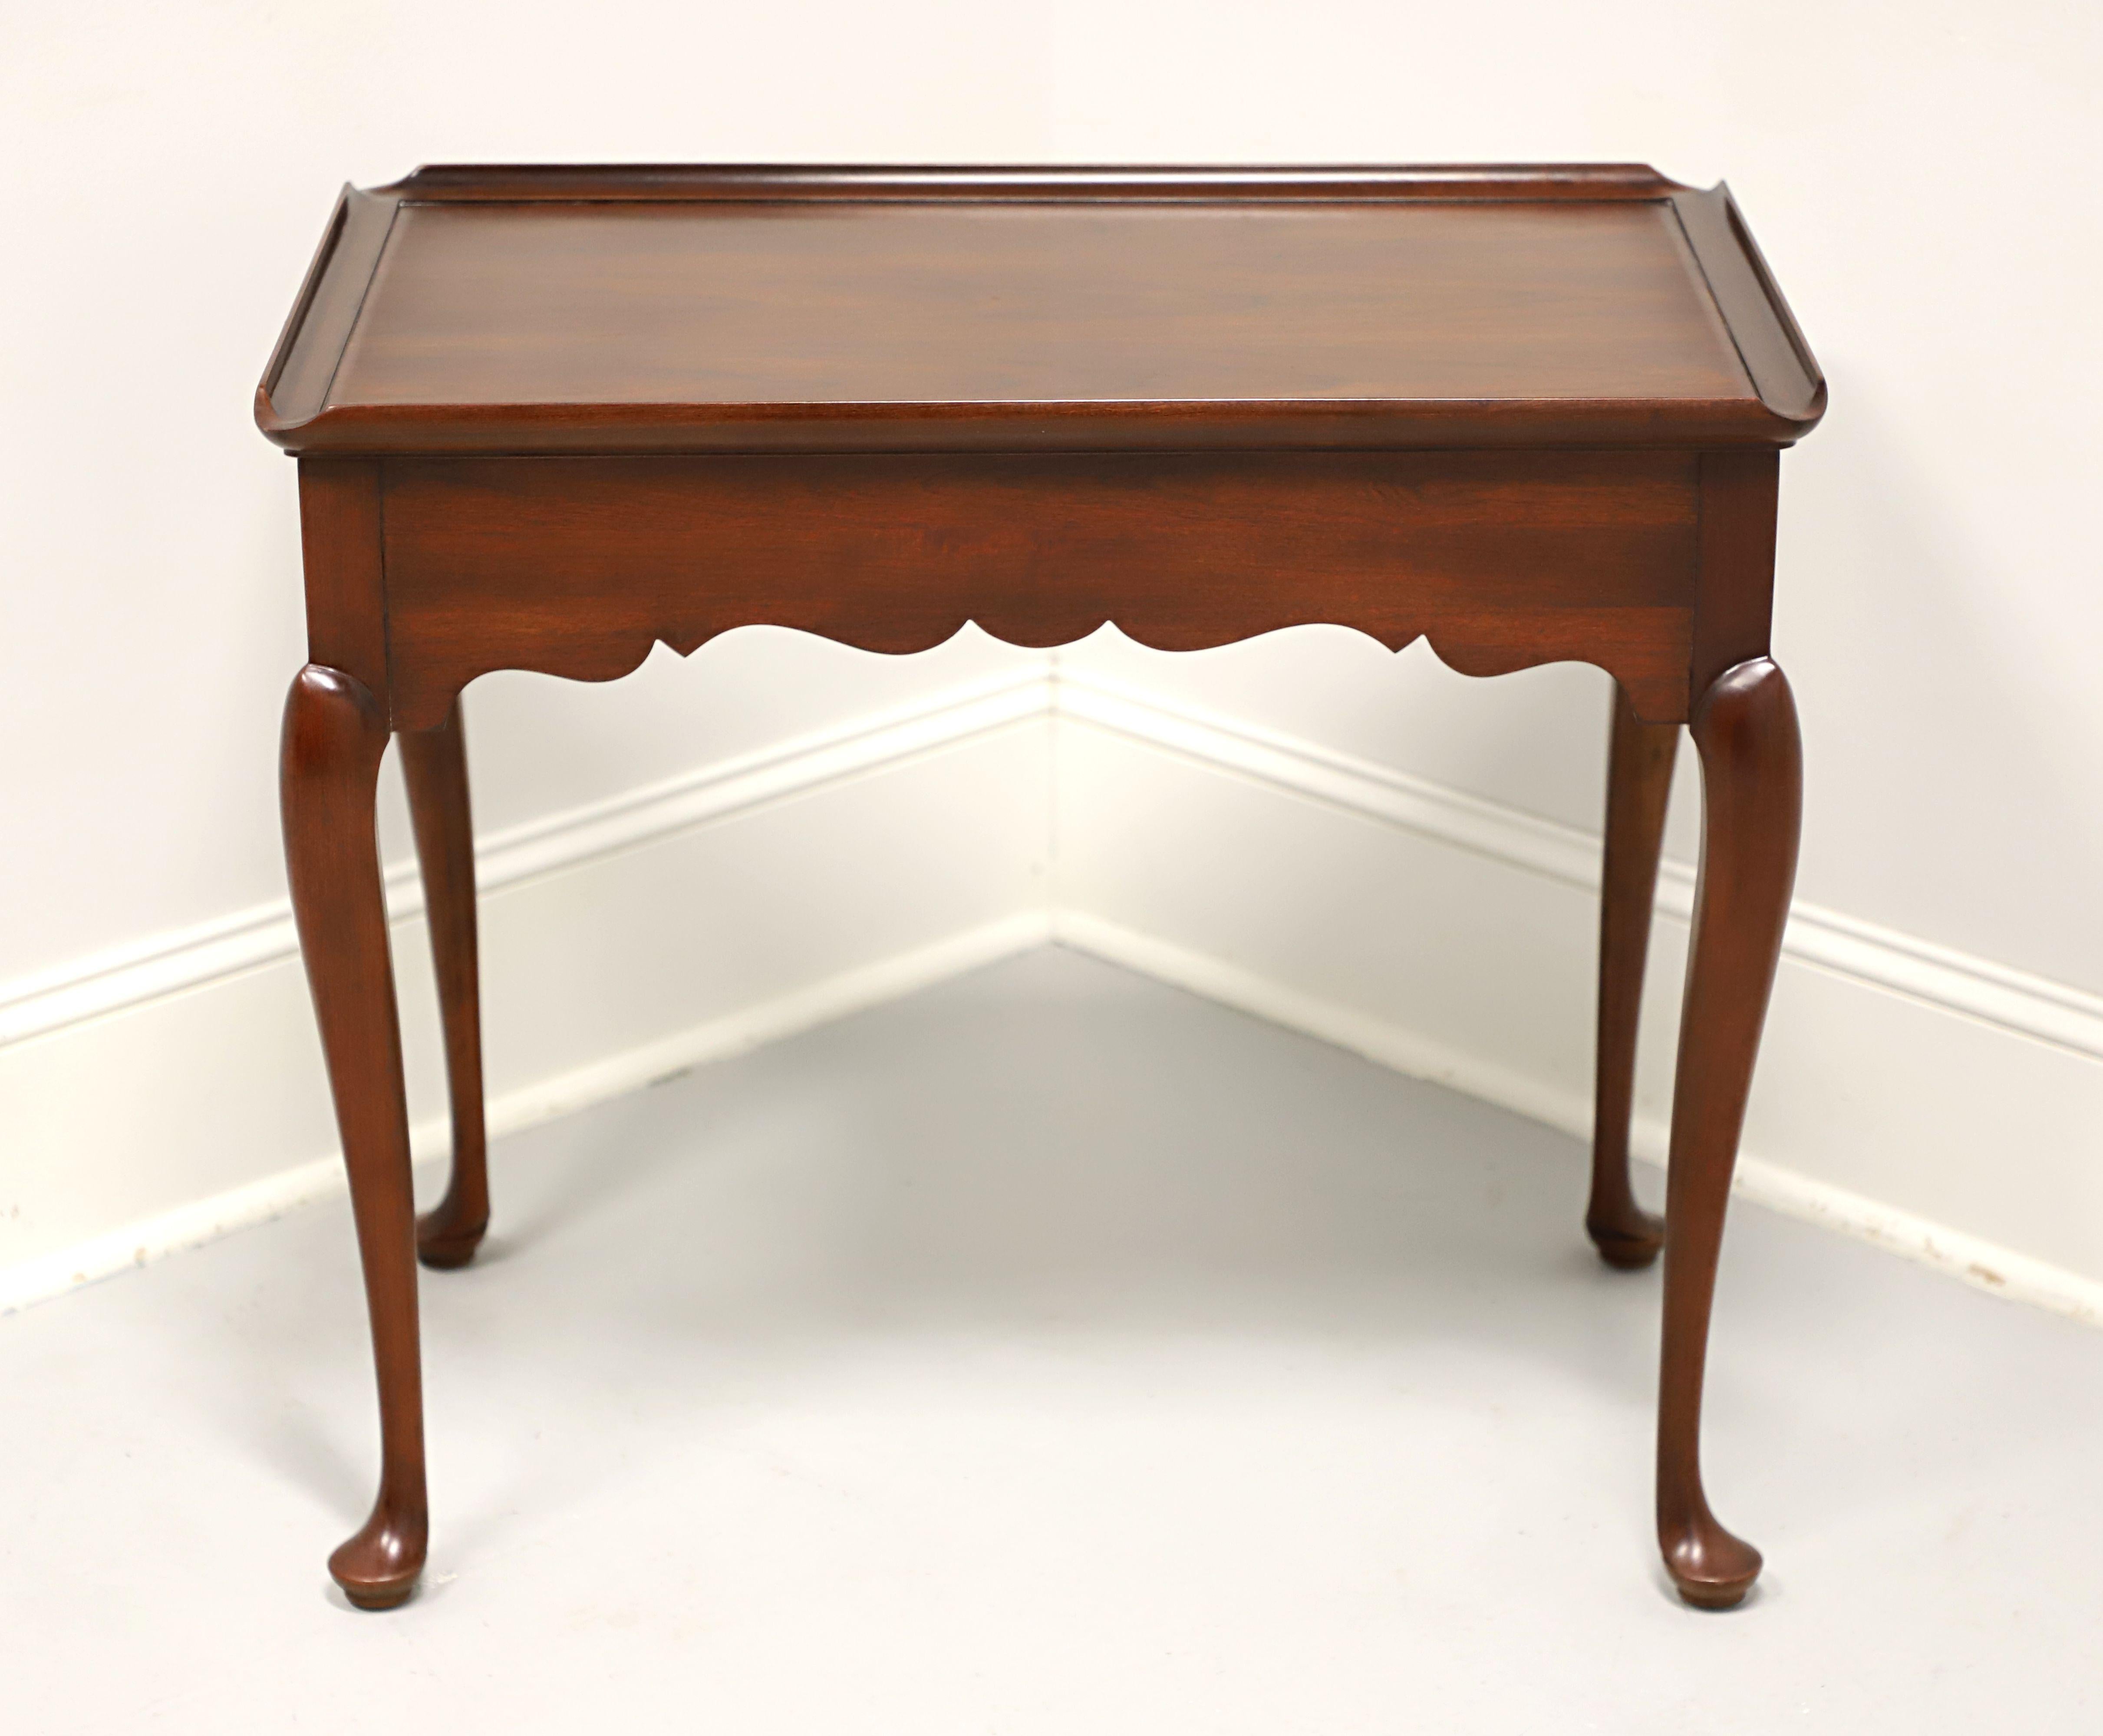 A tea table in the Queen Anne style by Statton Furniture. Solid cherry wood with their Centennial finish, two side slide out trays with brass knobs, carved apron, tapered legs and pad feet. Made in Hagerstown, Maryland, USA, in the late 20th